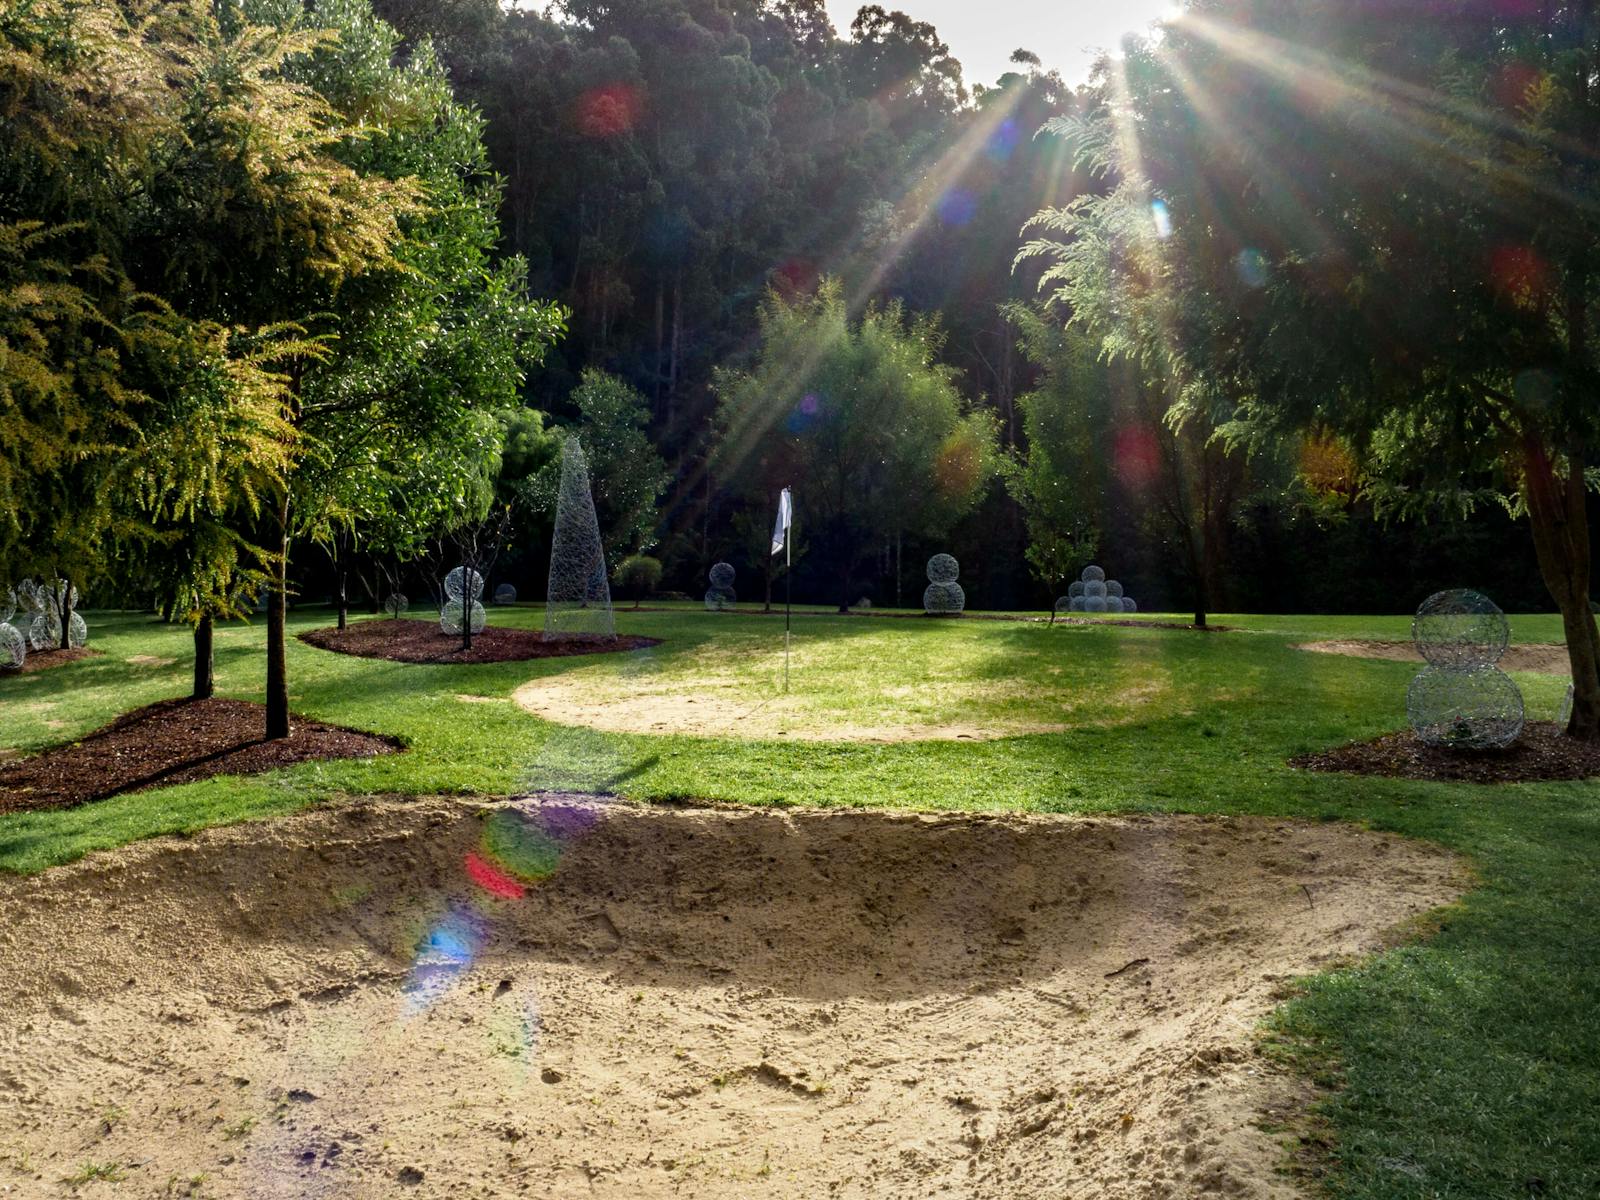 Sand bunker, wire sculptures made onsite, sunlight filtering through tree tops, lush green grass